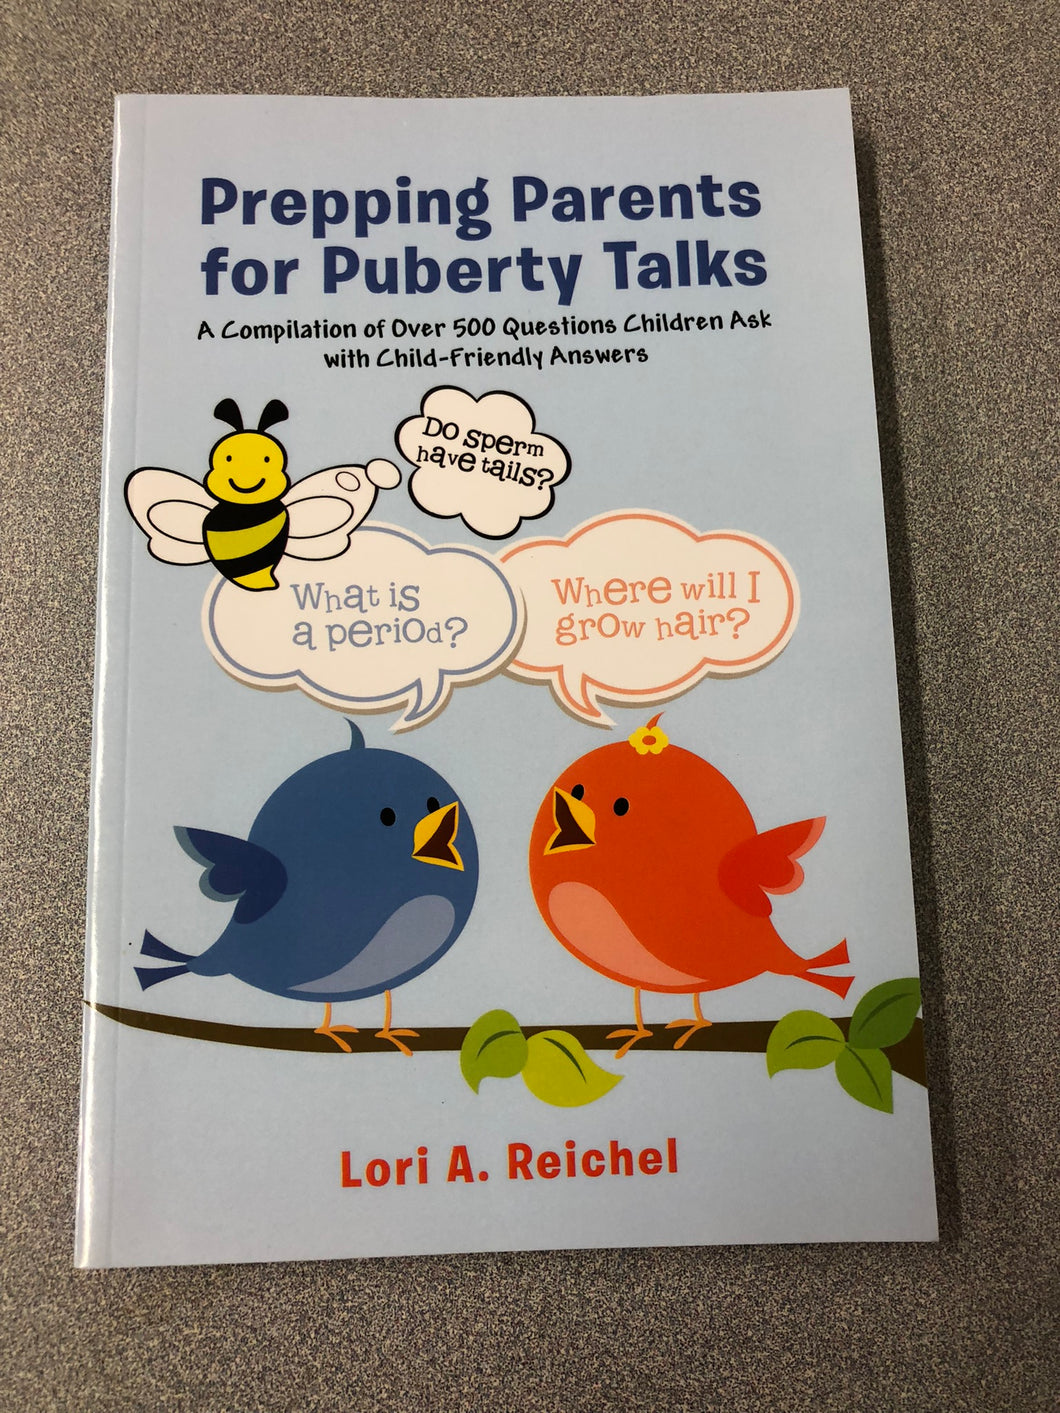 Prepping Parents for Puberty Talks: a Compilation of Over 500 Questions Children Ask with Child-Friendly Answers, Reichel, Lori A. [2015] EM 7/22